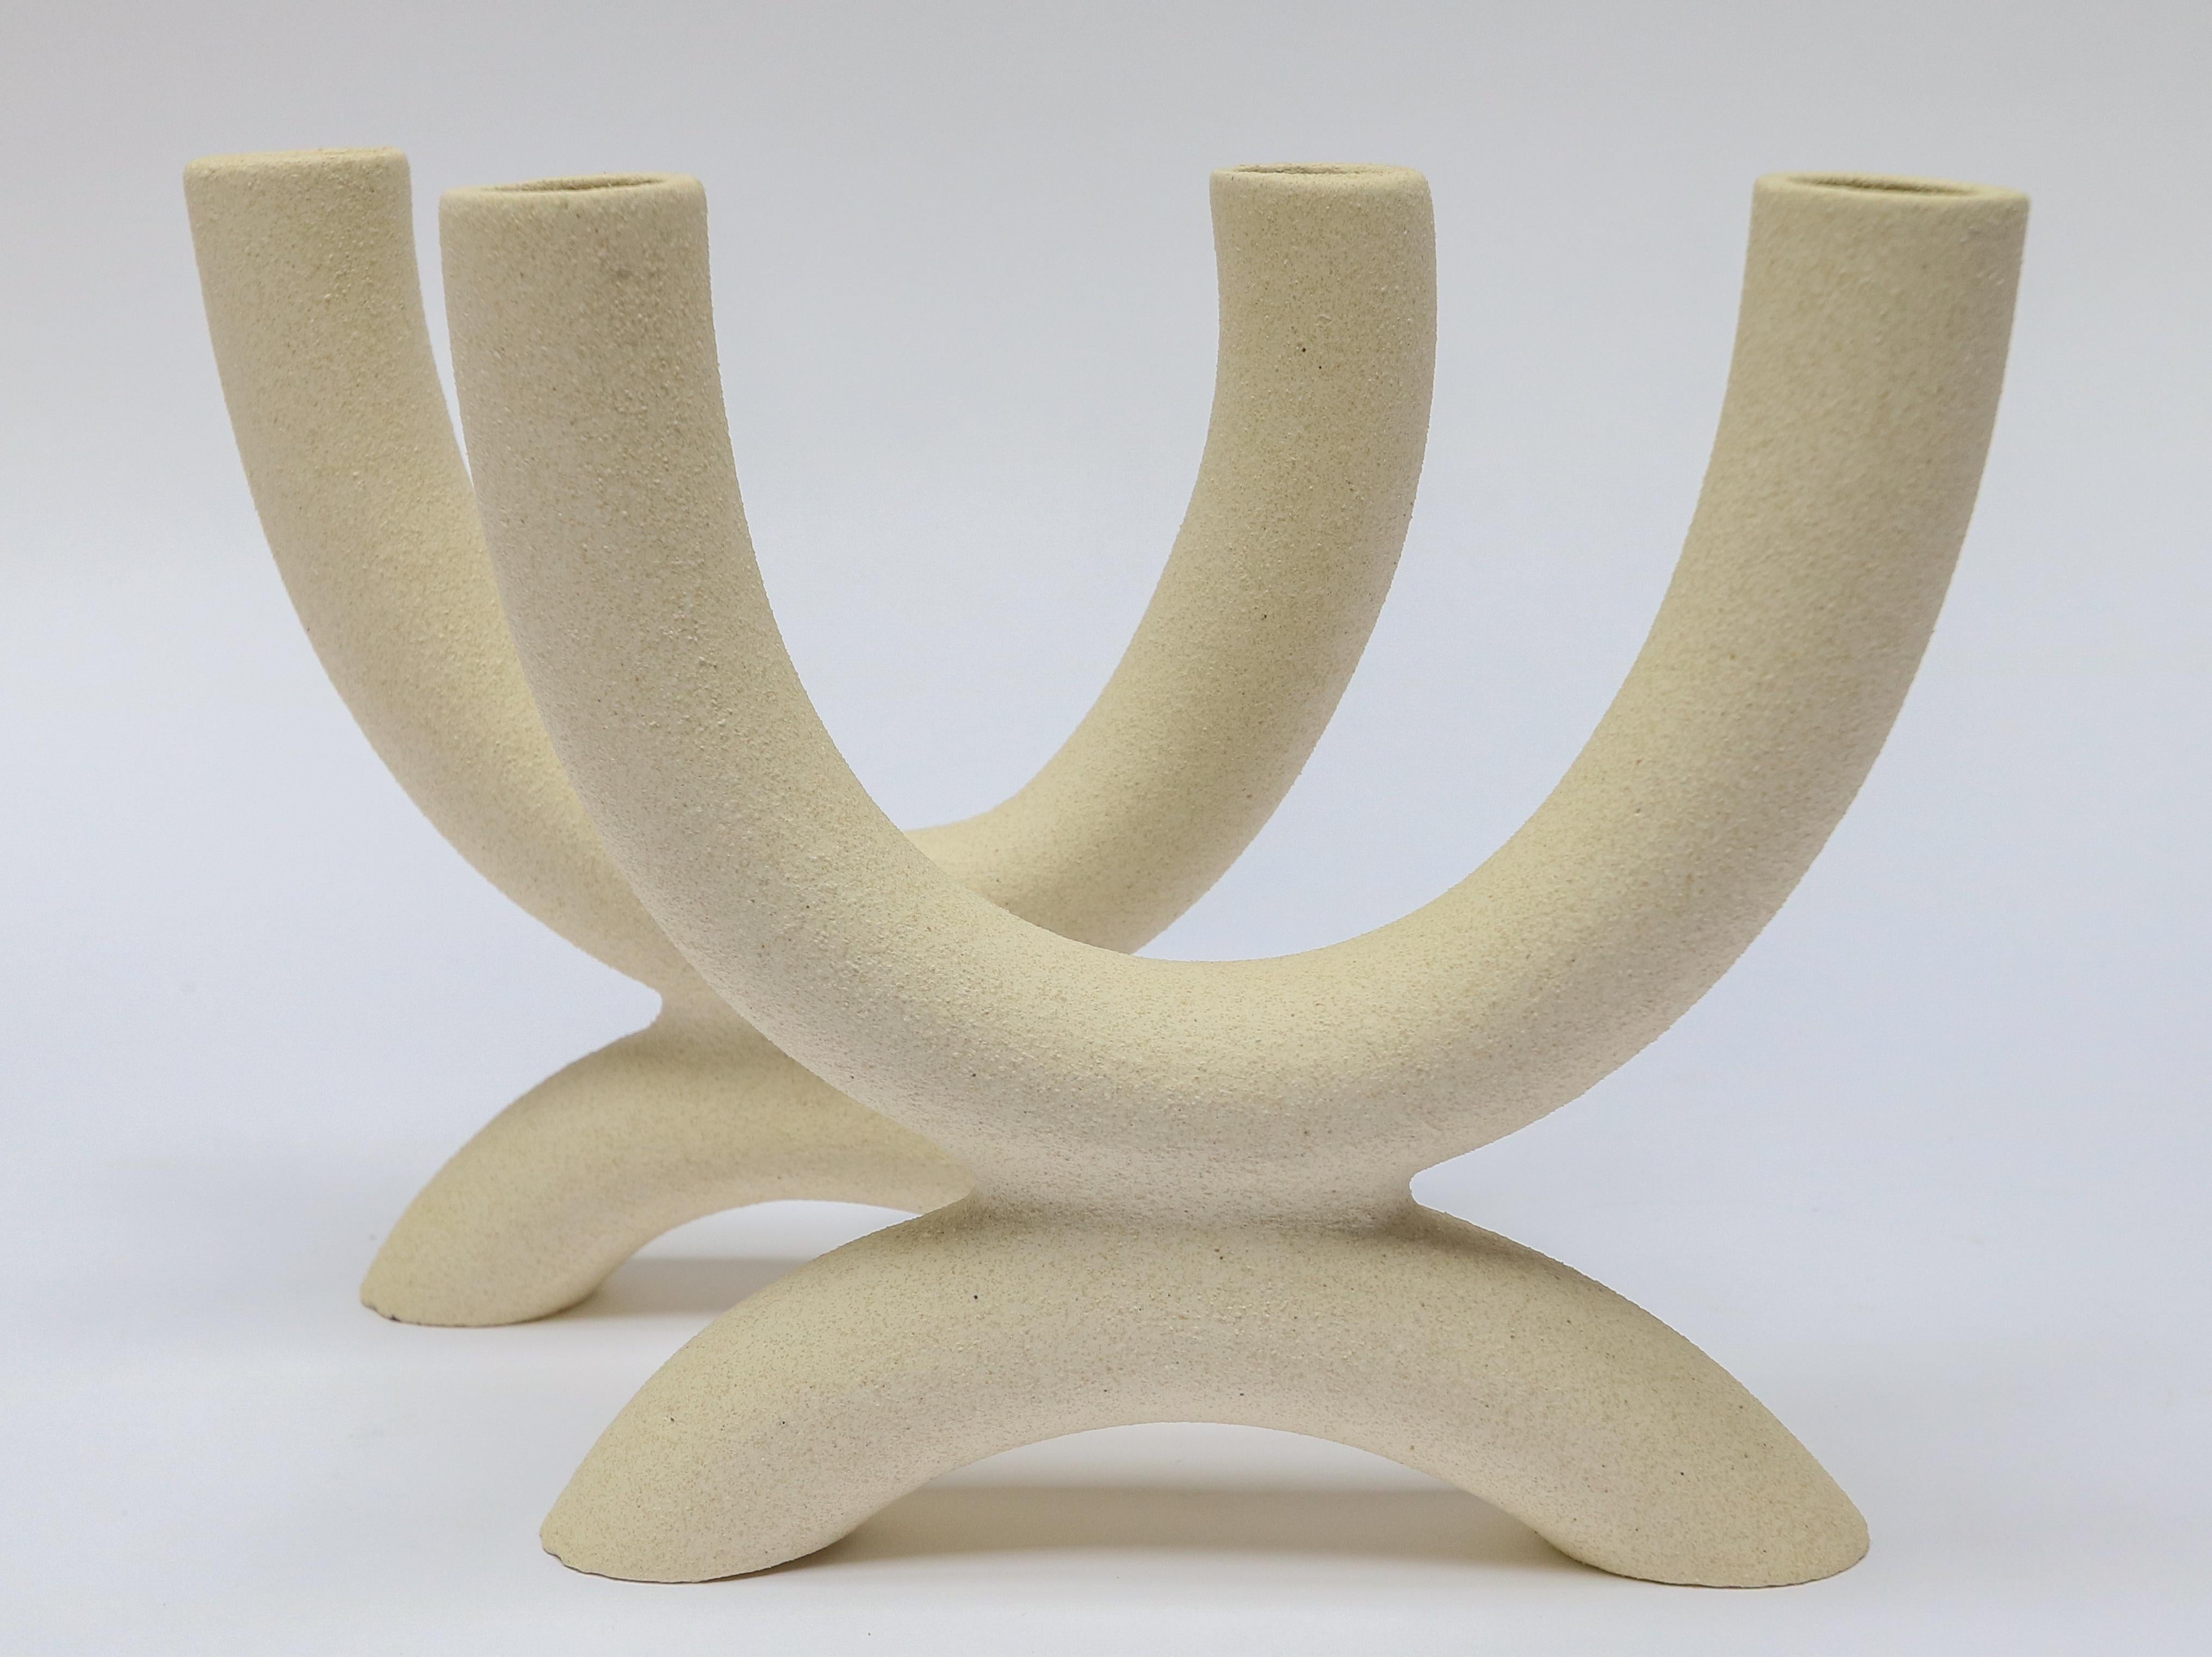 Ceramic Forevermore & Harmony Duel Candle Holders in Blanc White & Birch Tan For Sale